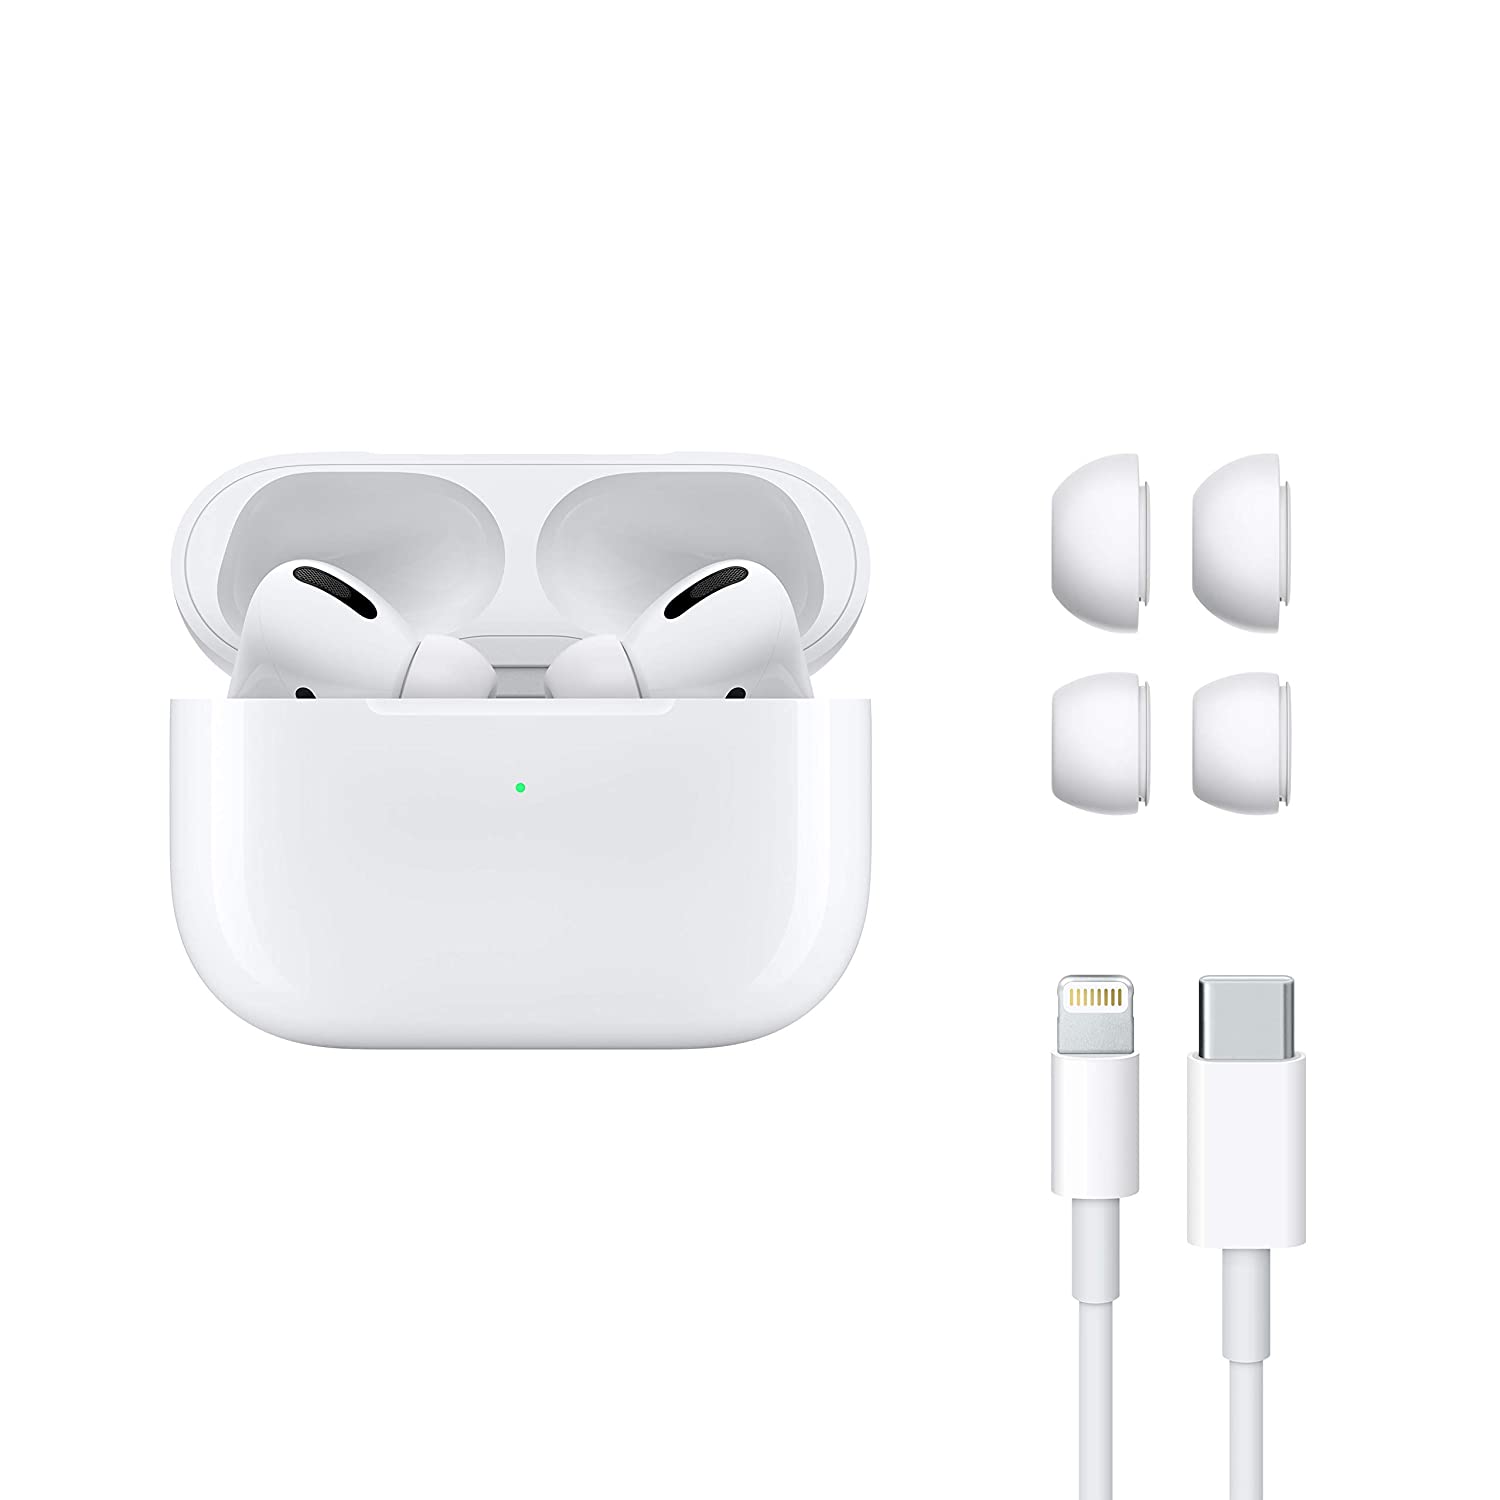 Amazon Deal: Check Out This Offer On Apple AirPods, Steal The Deal For Less Than 10,000